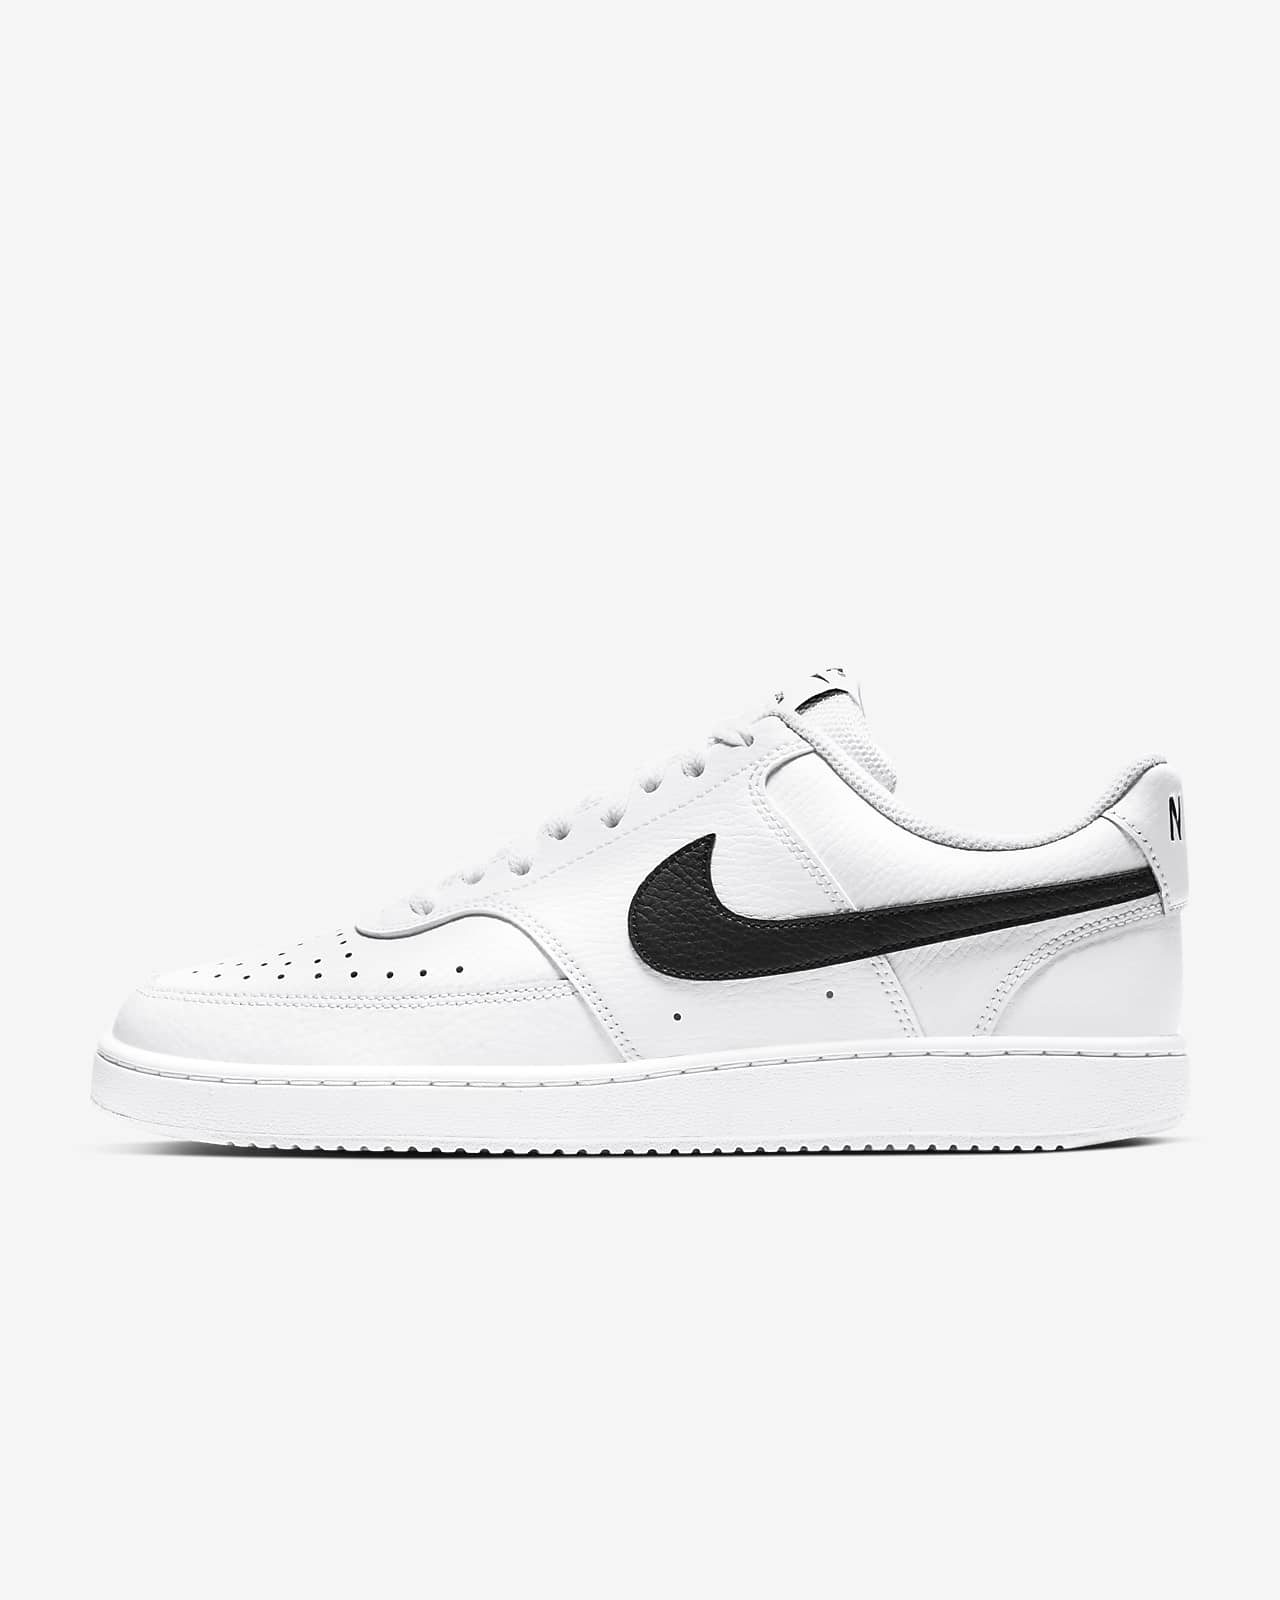 men's nikecourt vision low casual sneakers from finish line